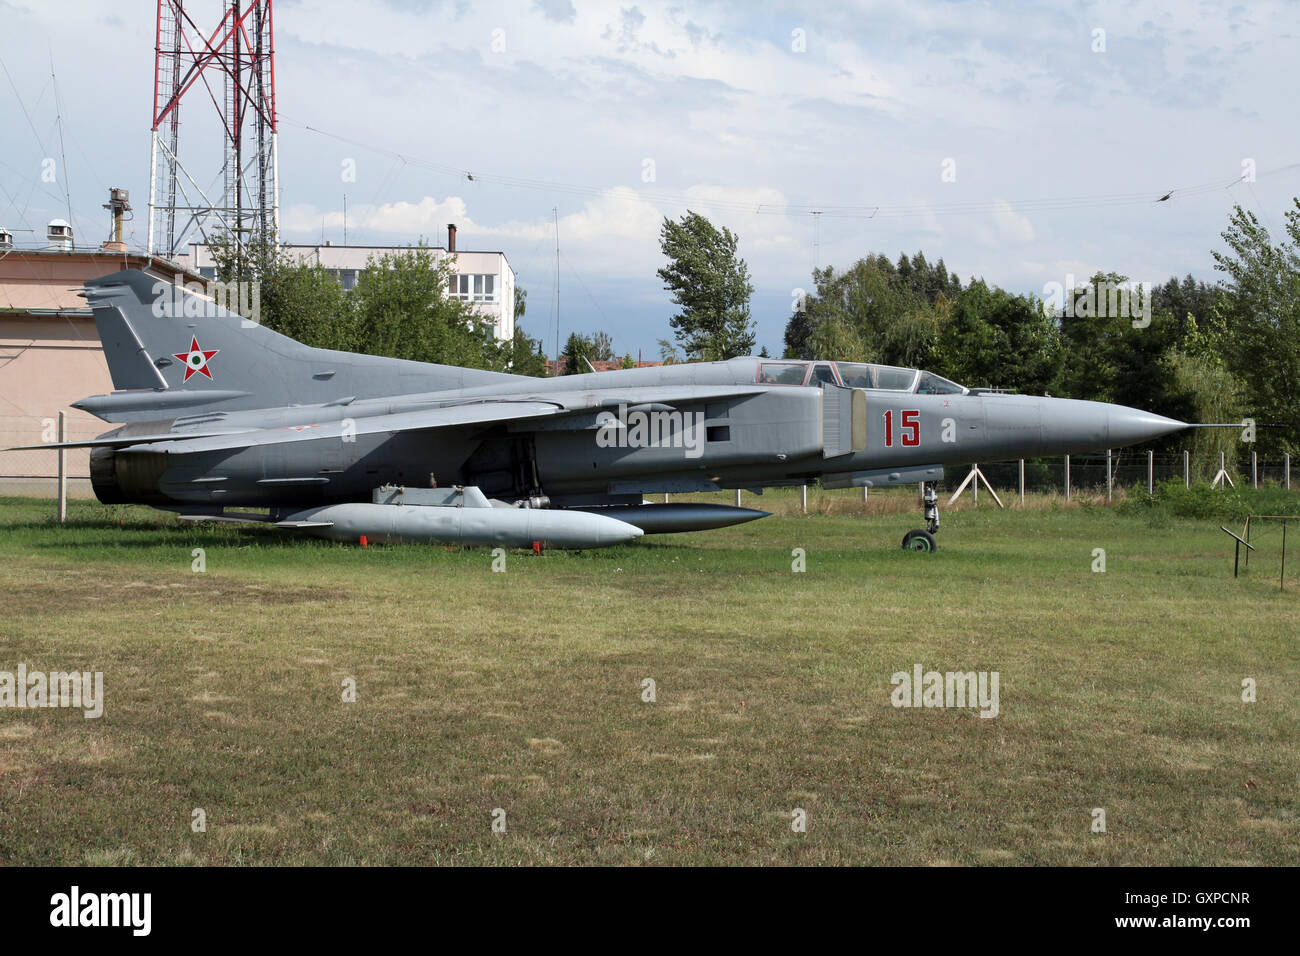 Hungarian Air Force MiG-23 Flogger on display in the Szolnok Aviation Museum, Hungary Stock Photo